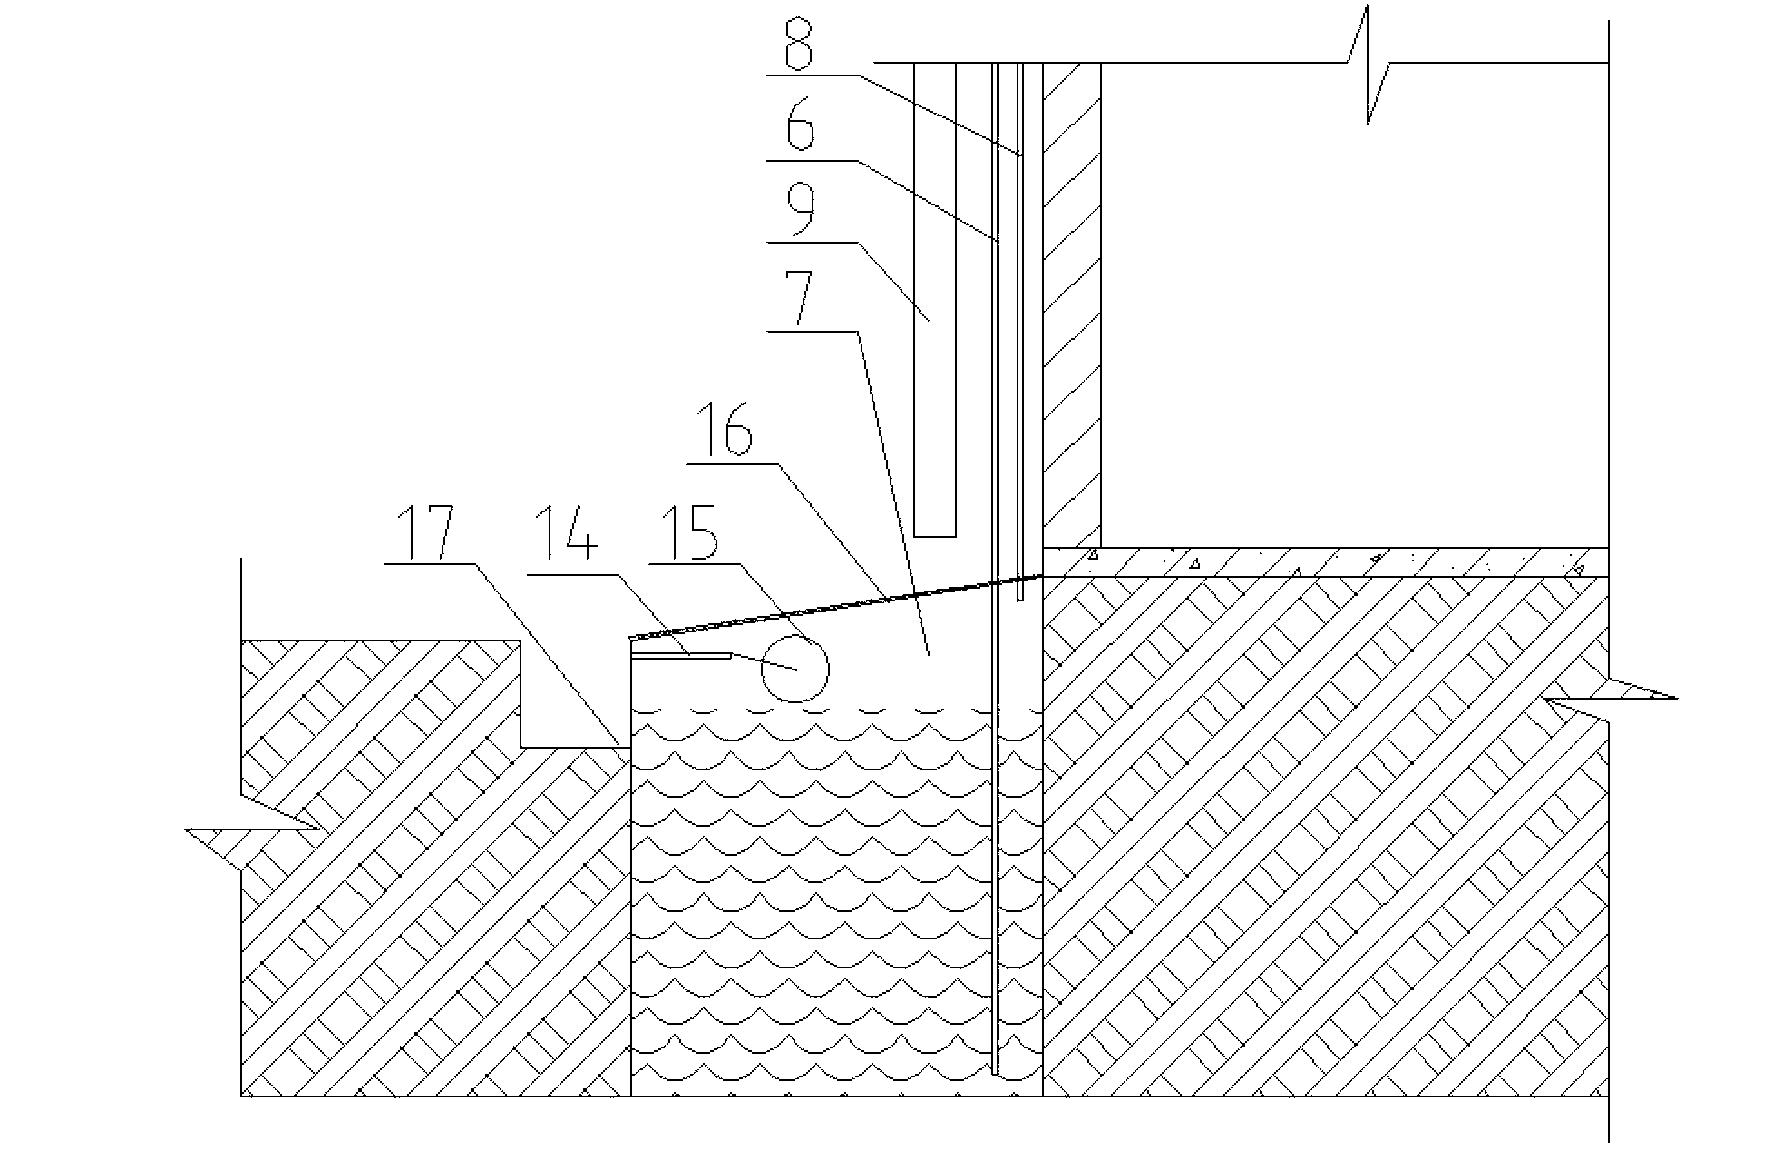 Wall body evaporation and temperature reduction device utilizing solar energy and nontraditional water sources